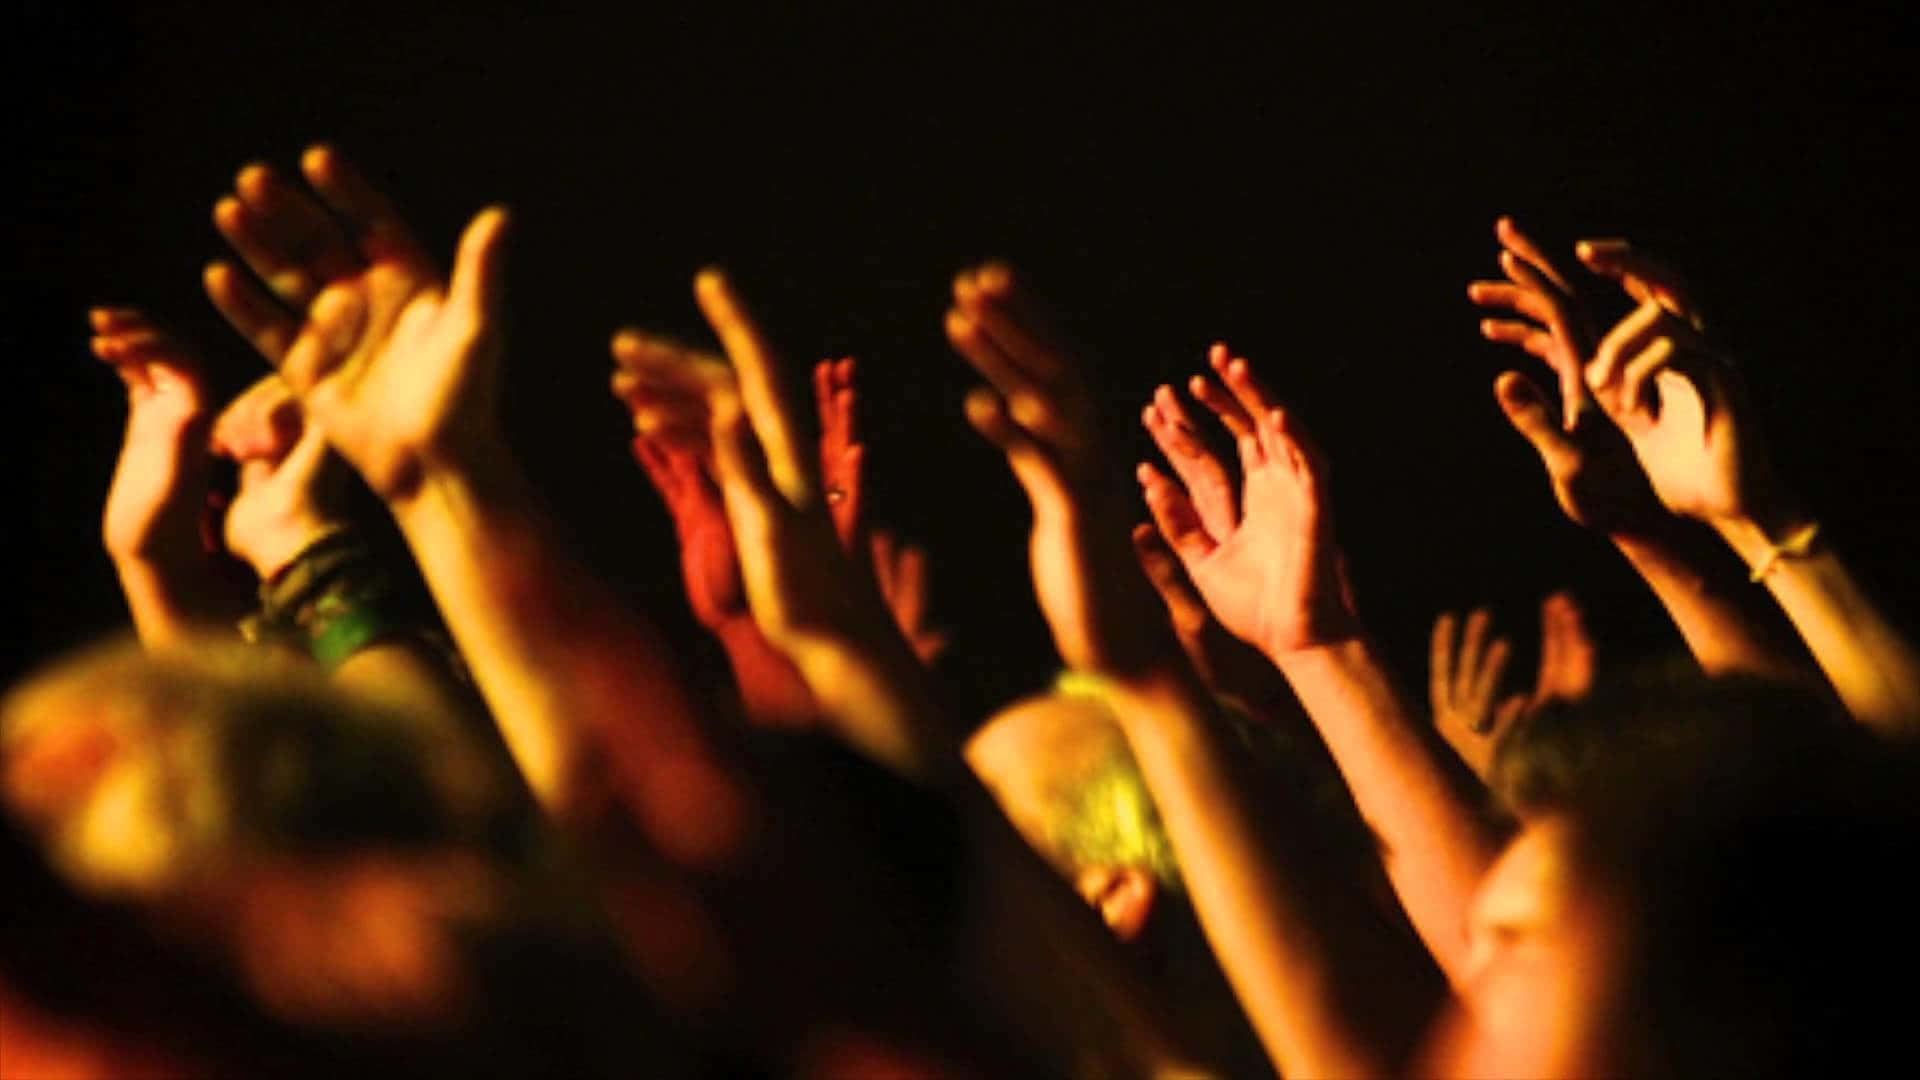 A Crowd Of People Raising Their Hands In The Air